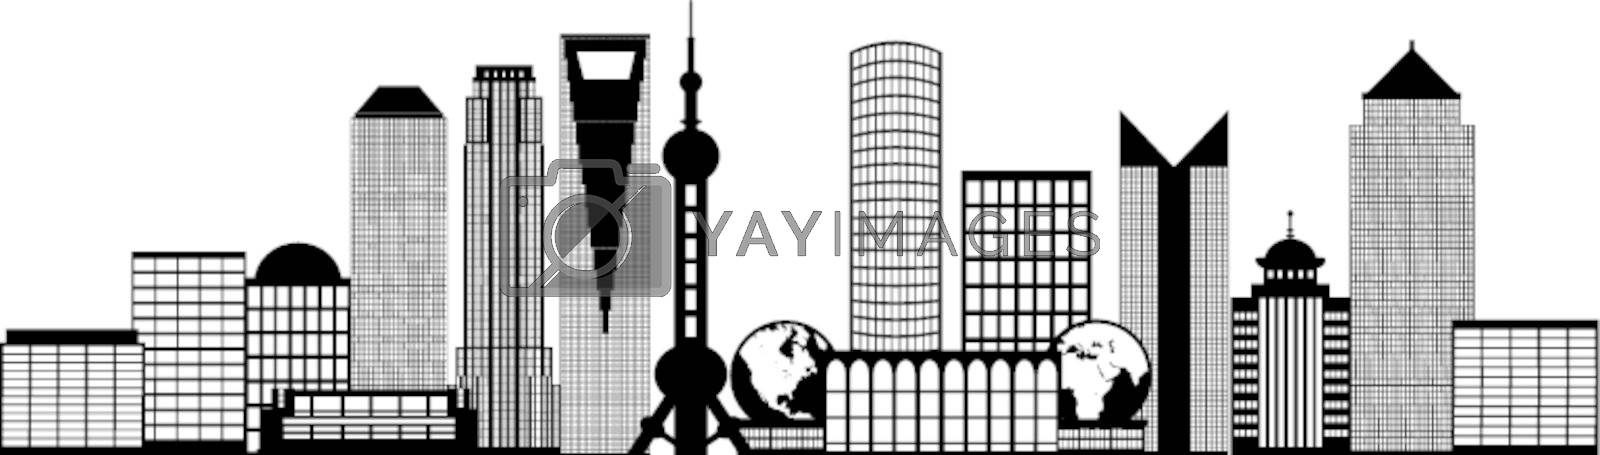 Royalty free image of Shanghai City Skyline Black and White Outline Illustration by jpldesigns